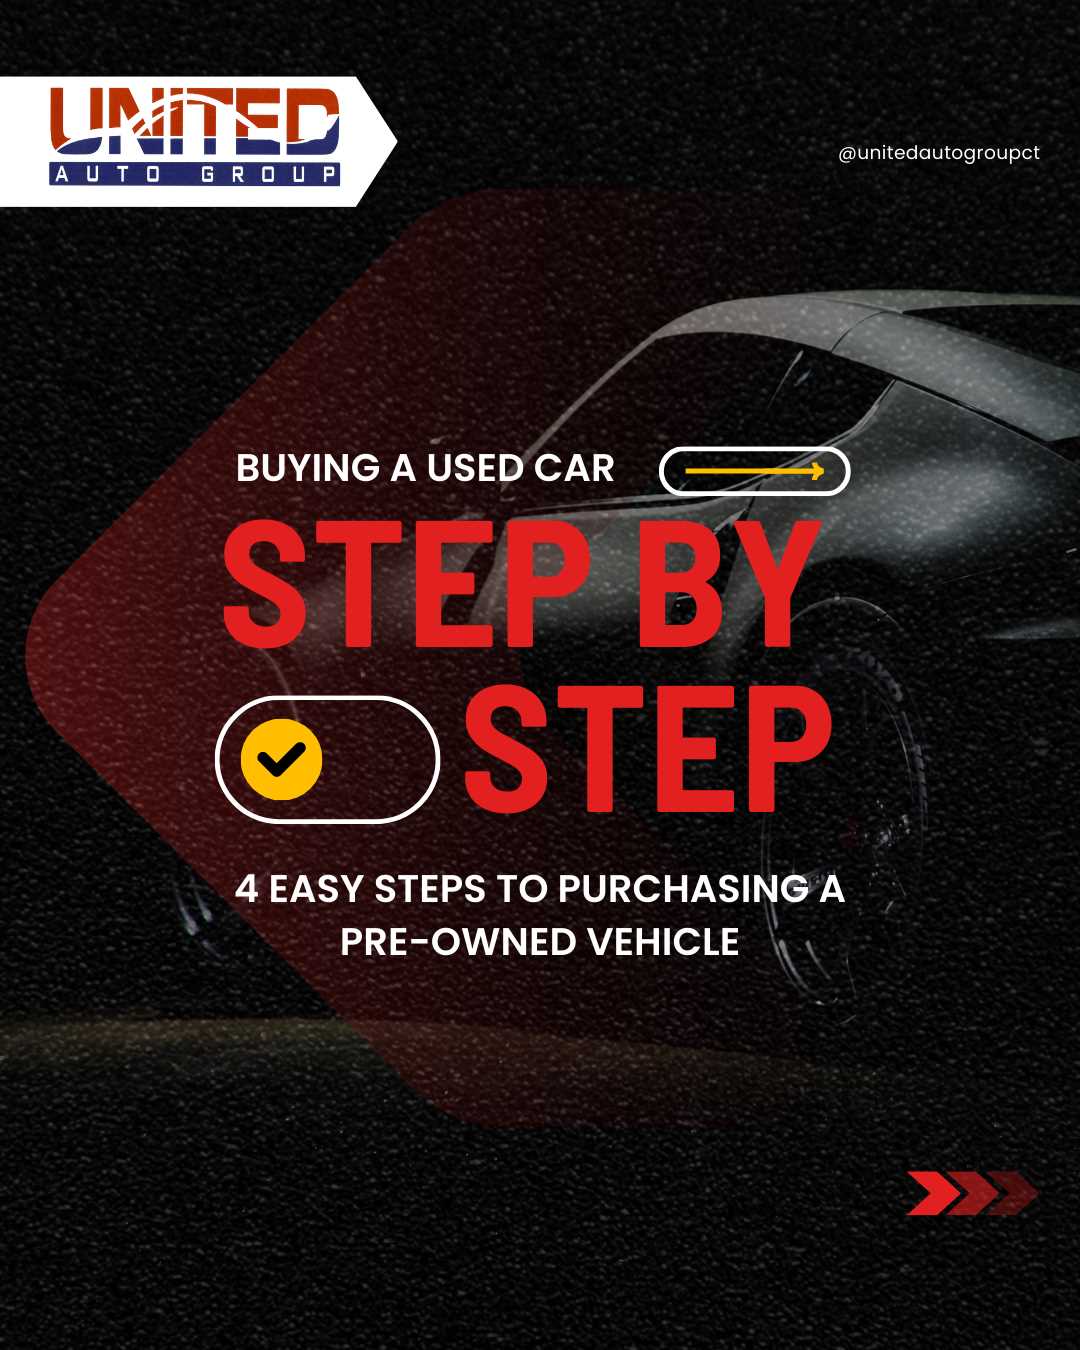 Step by step: How to buy a used car